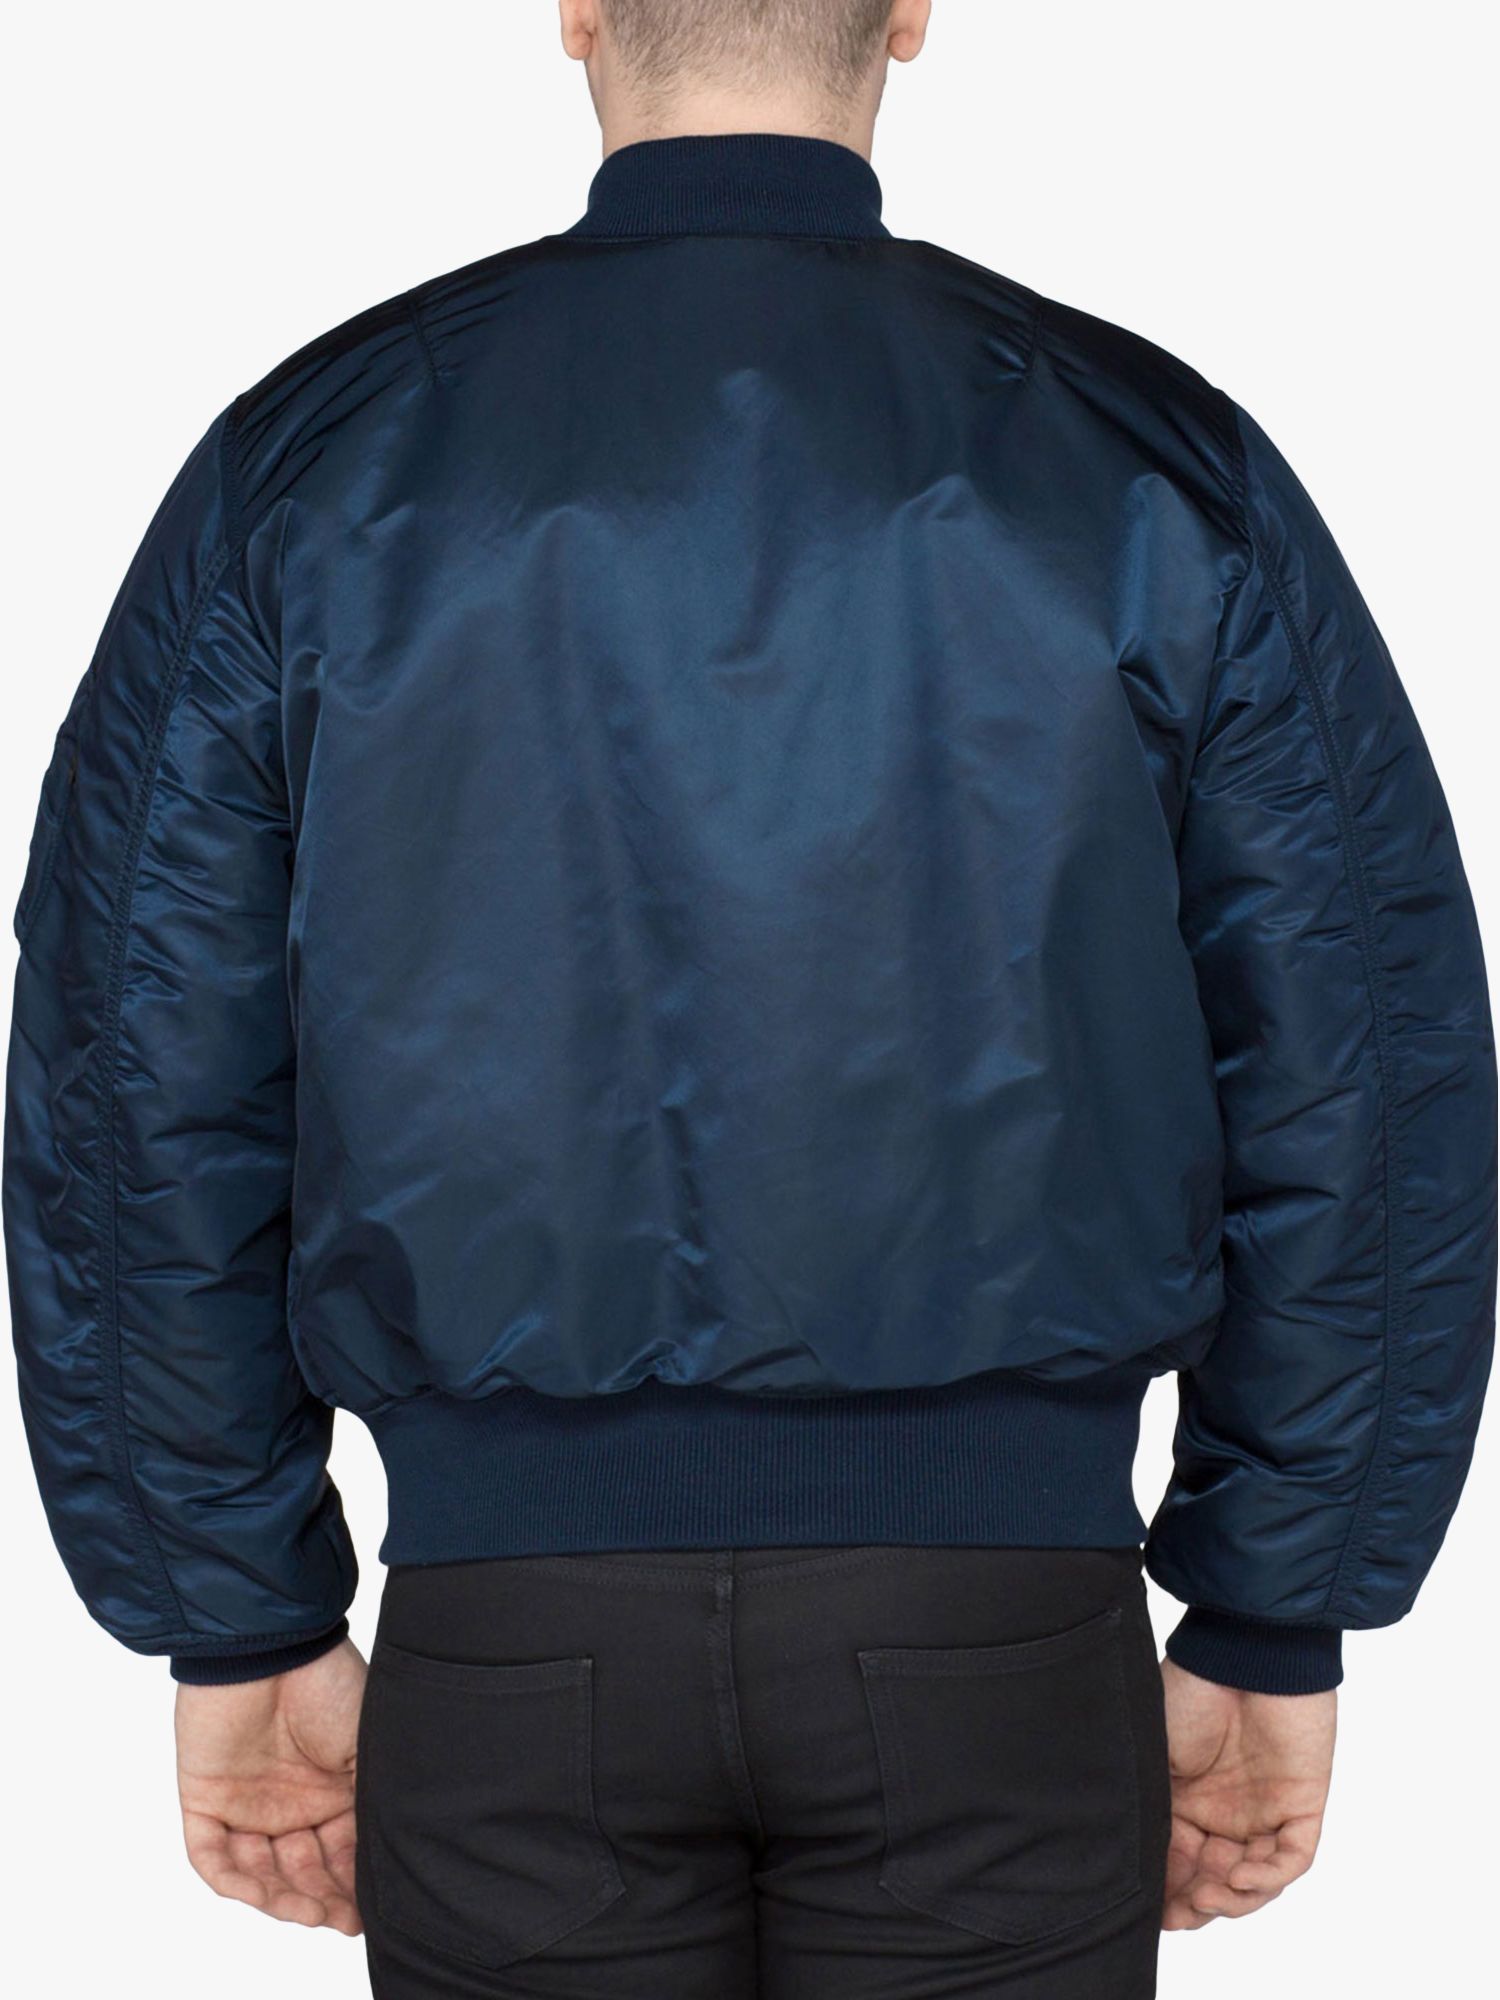 Alpha Industries MA1 Bomber Jacket, Rep Blue, S